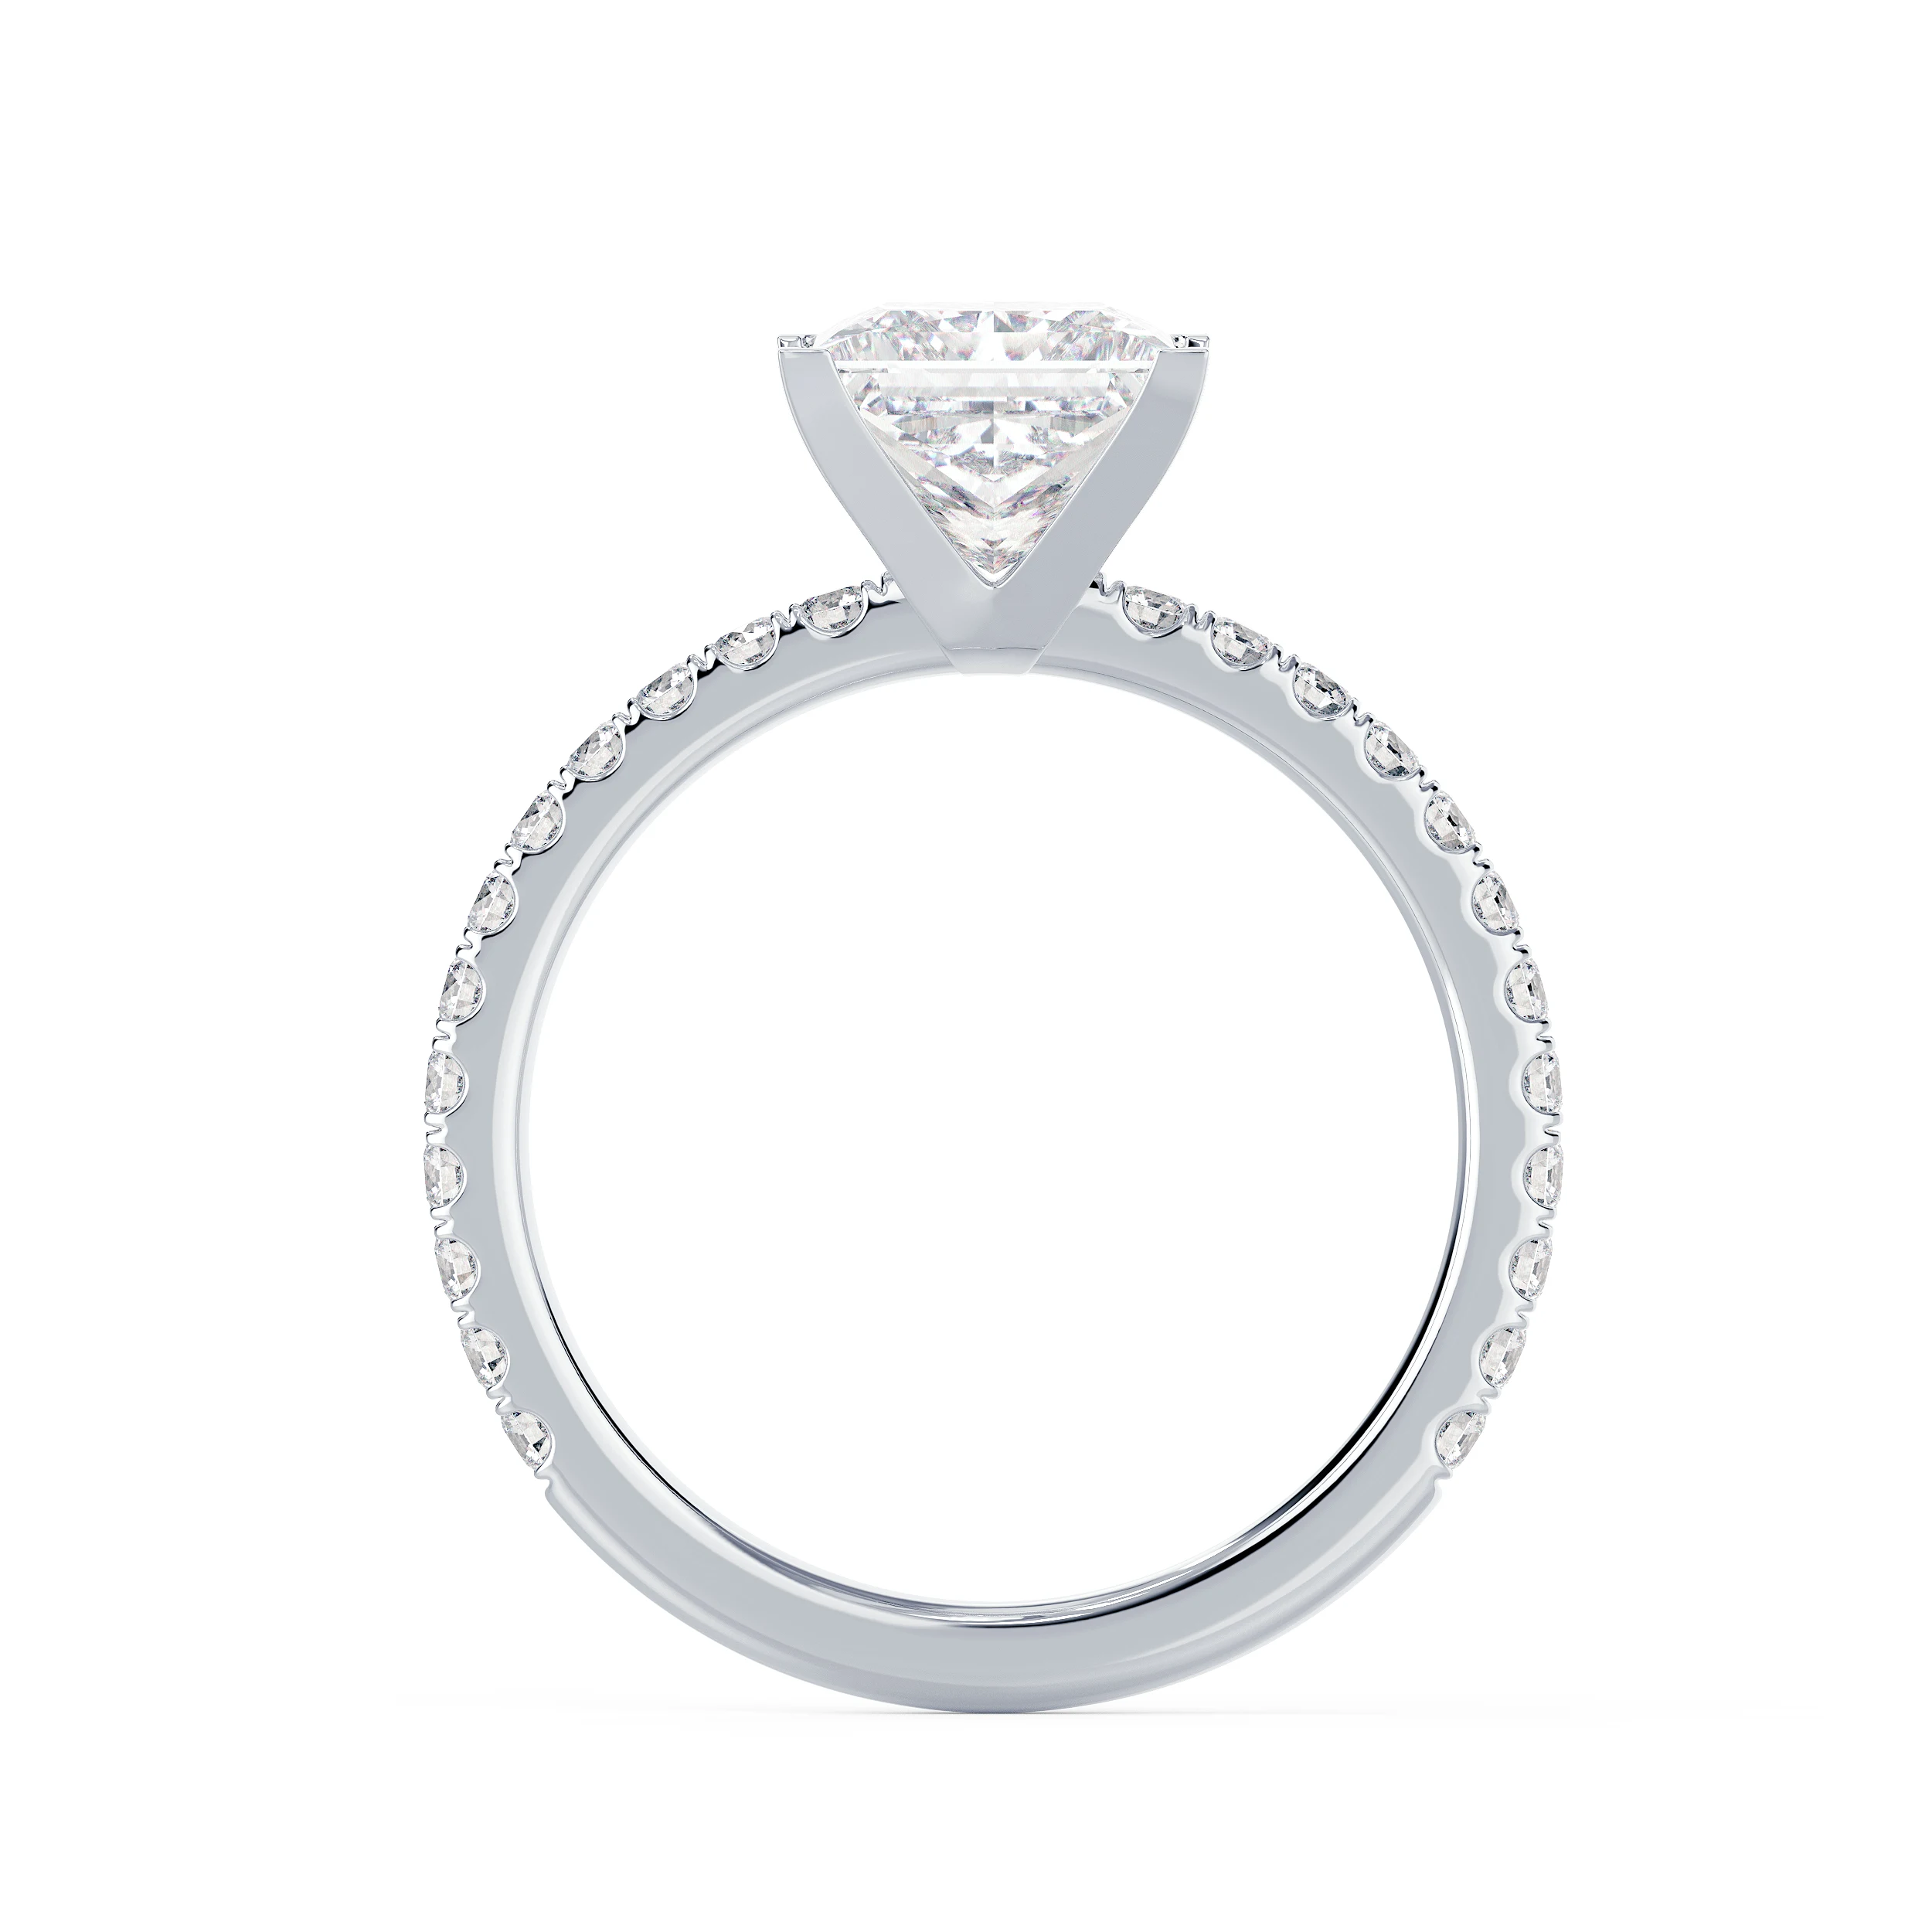 Exceptional Quality Man Made Diamonds Princess Classic Four Prong Pavé Setting in White Gold (Profile View)